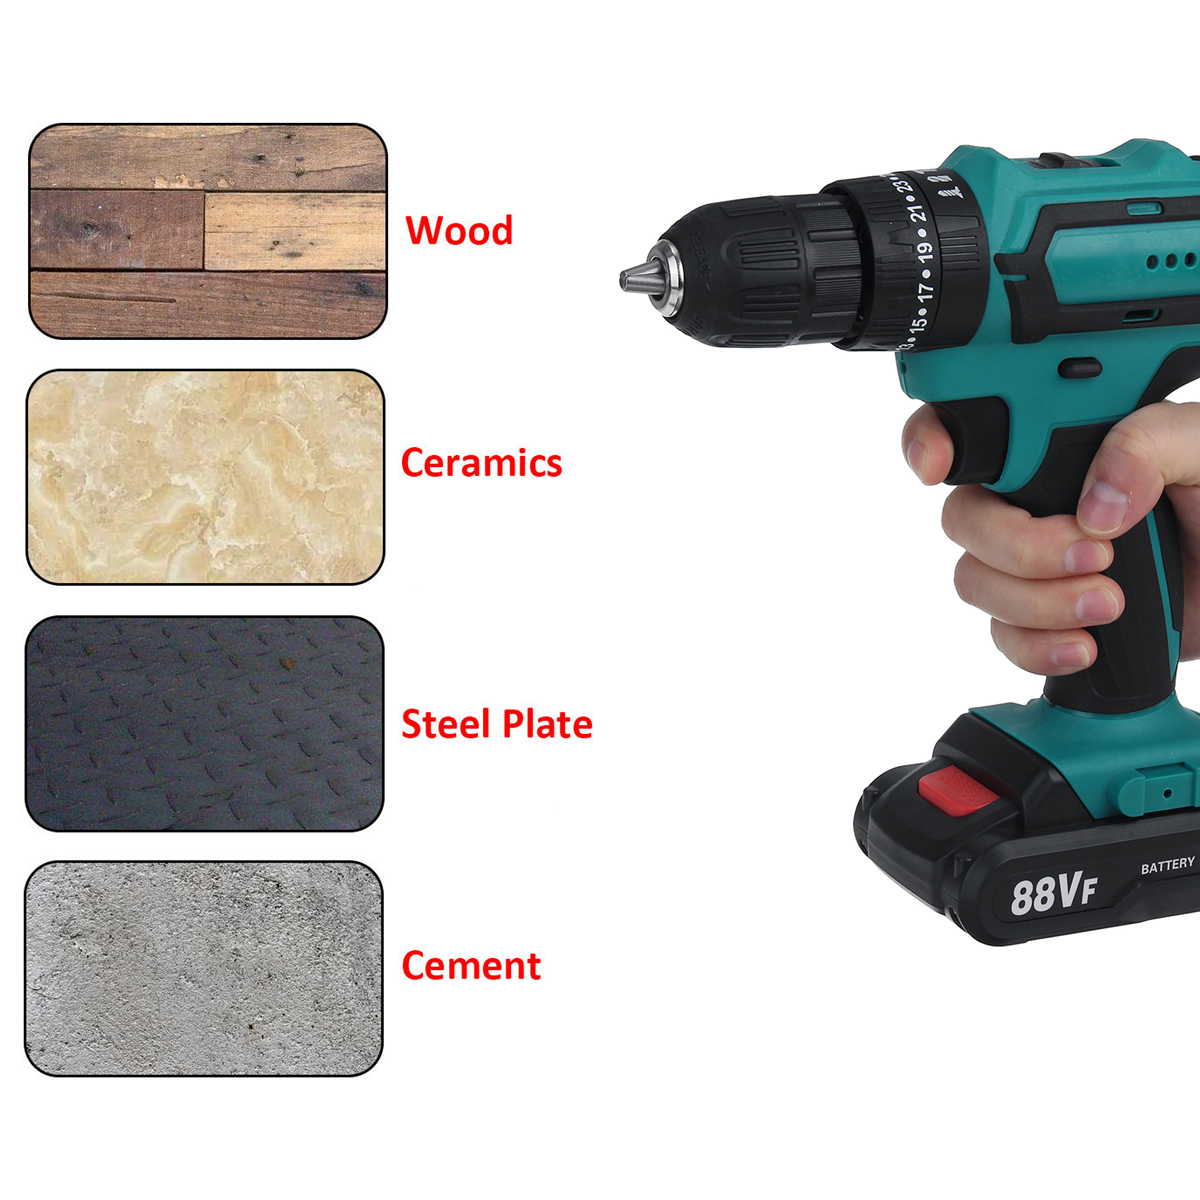 88VF-Cordless-Drill-3-IN-1-Electric-Screwdriver-Hammer-Impact-Drill-7500mAh-2-Speed-1787578-4